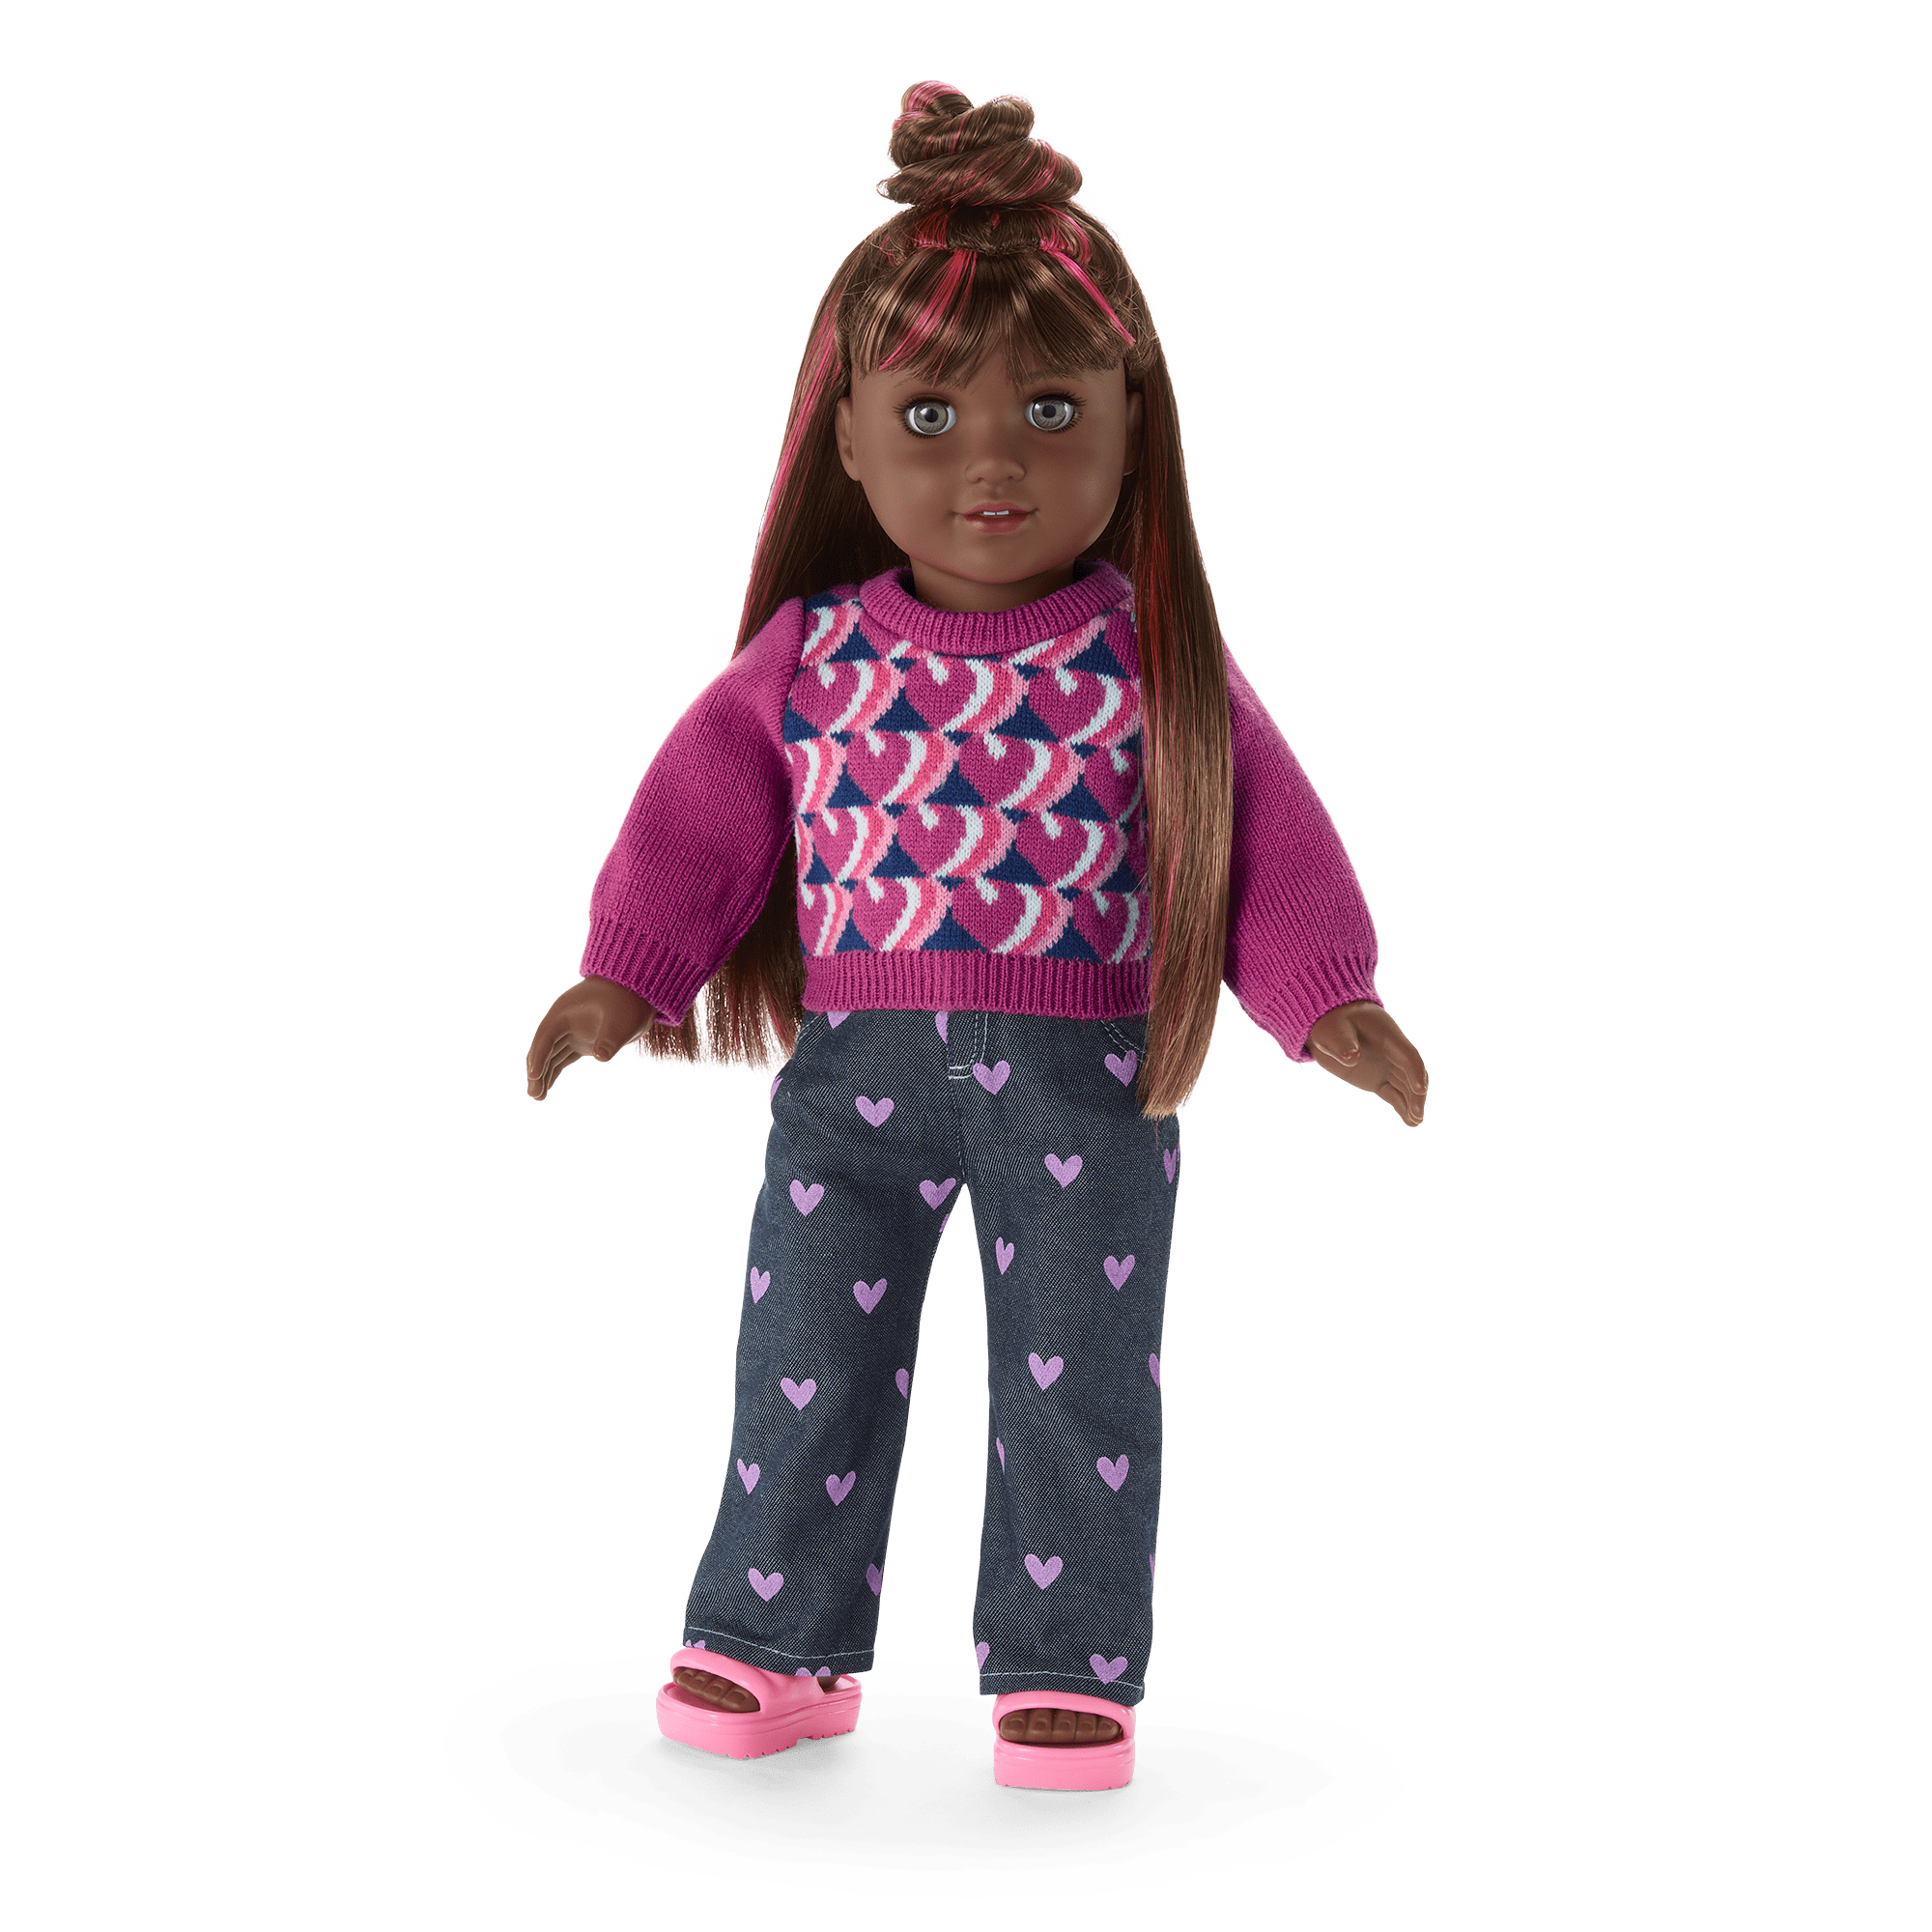 Relax & Refresh Outfit for 18-inch Dolls | American Girl®